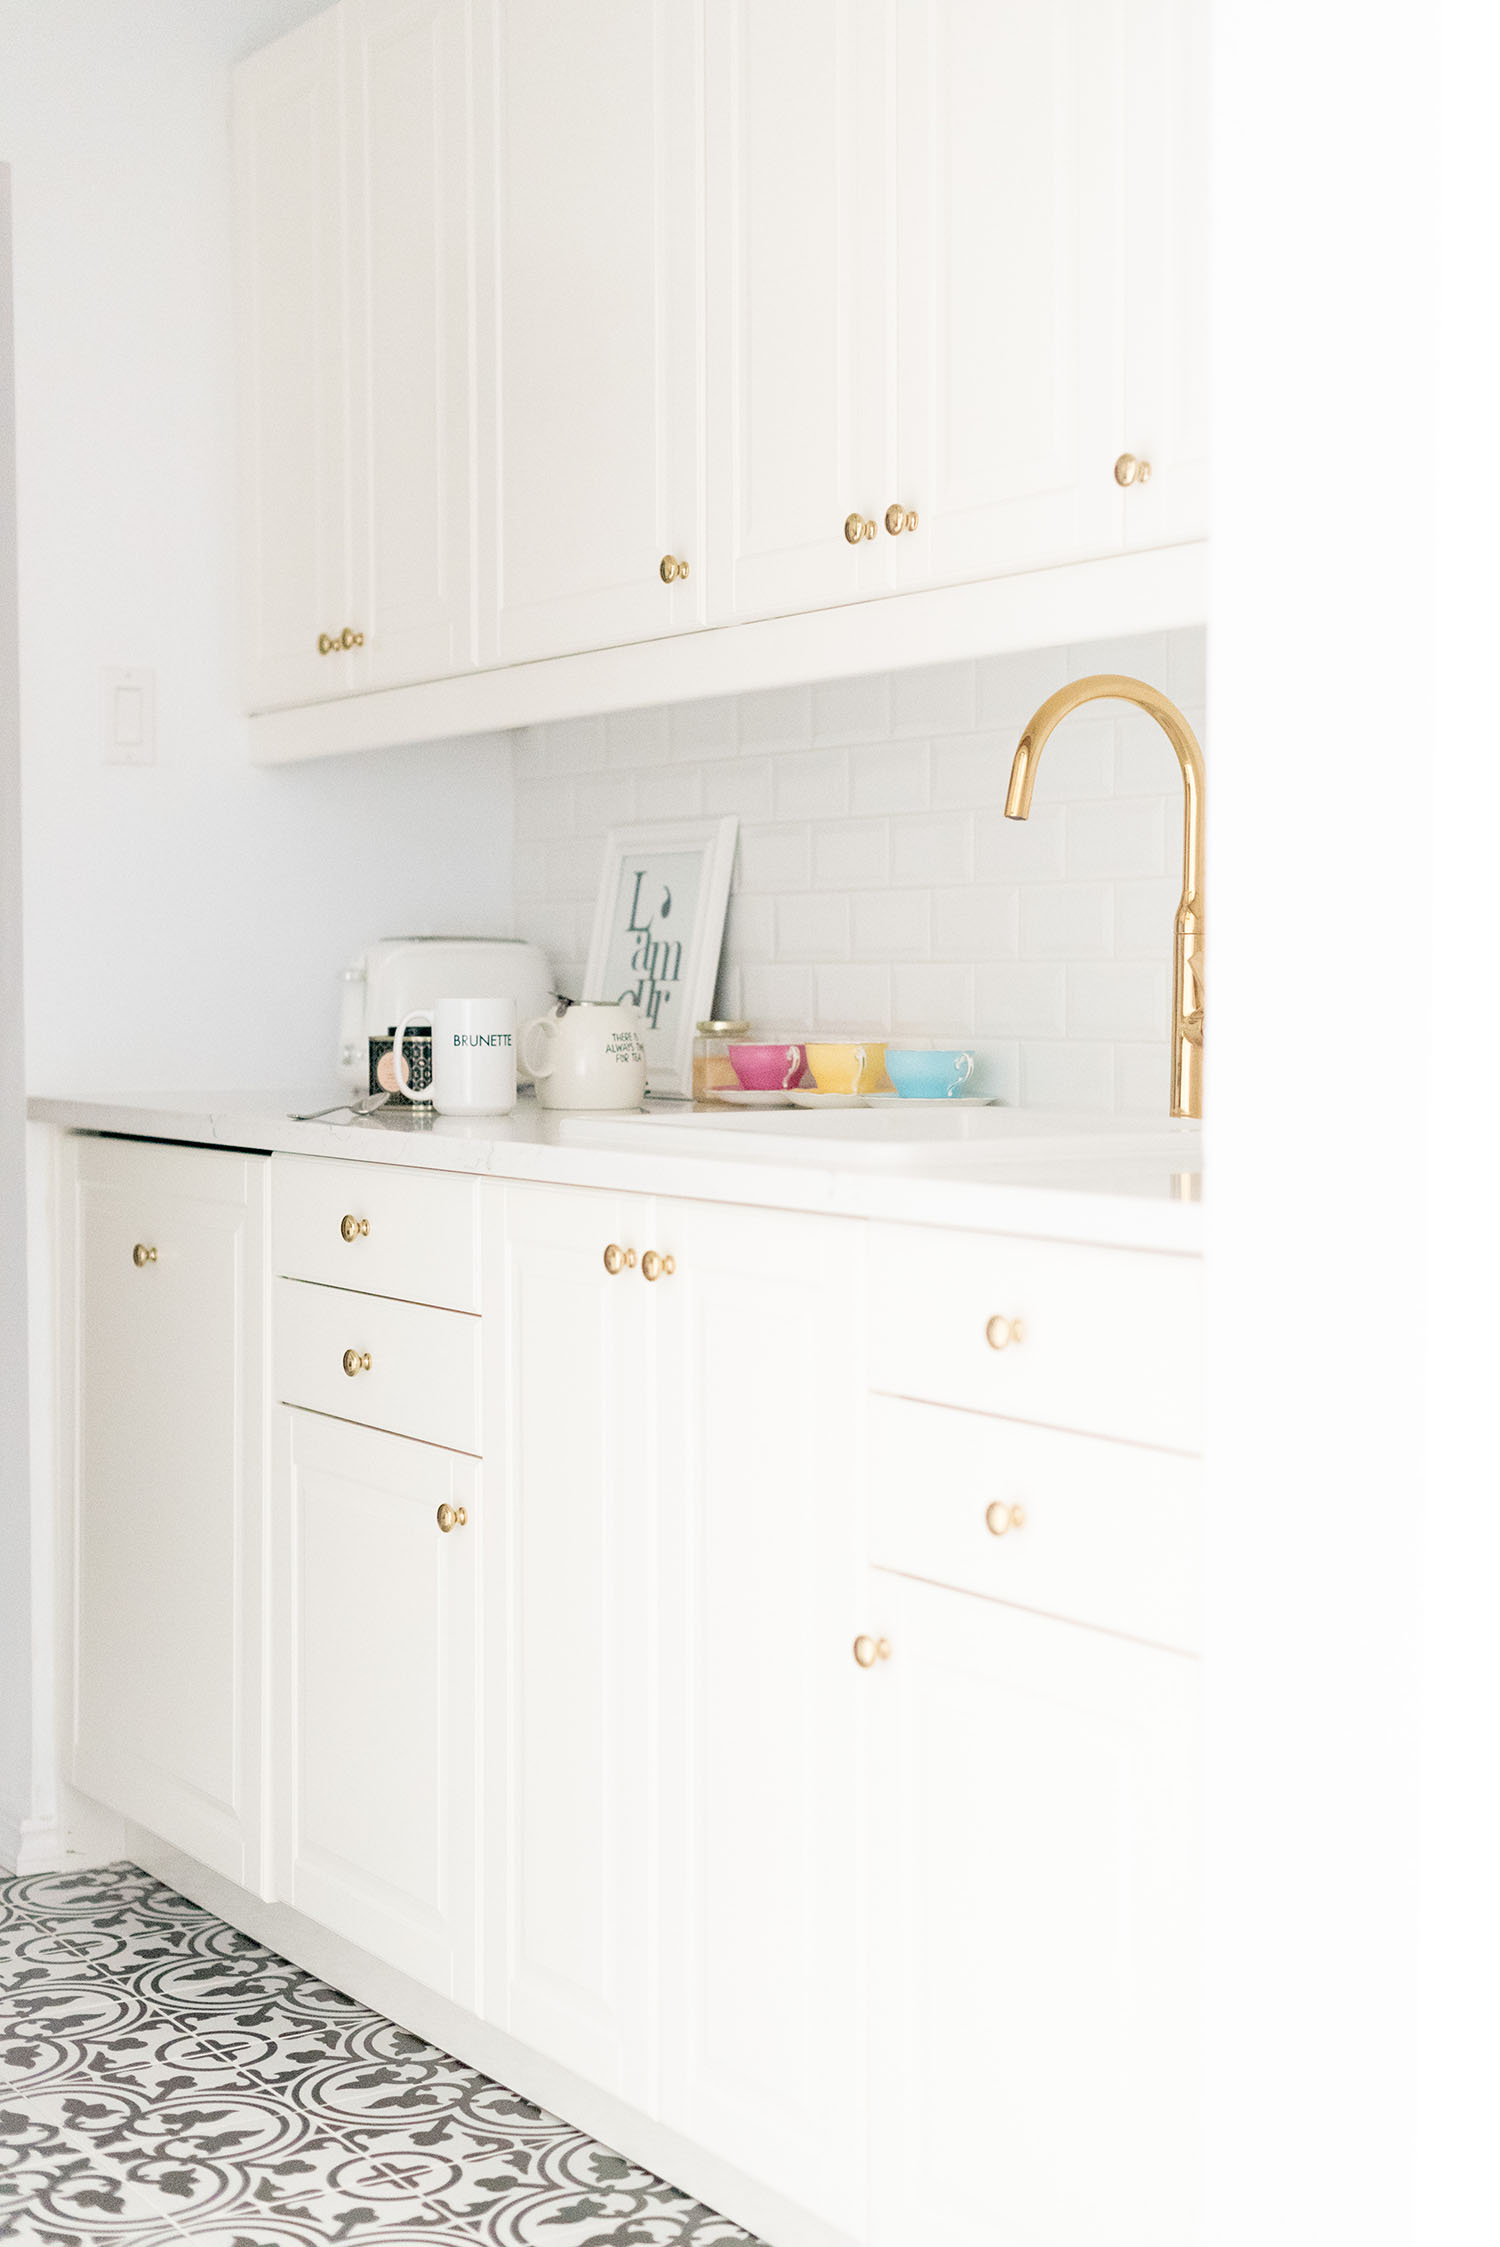 The all white and gold kitchen belonging to top Winnipeg lifestyle blogger Cee Fardoe of Coco & Vera